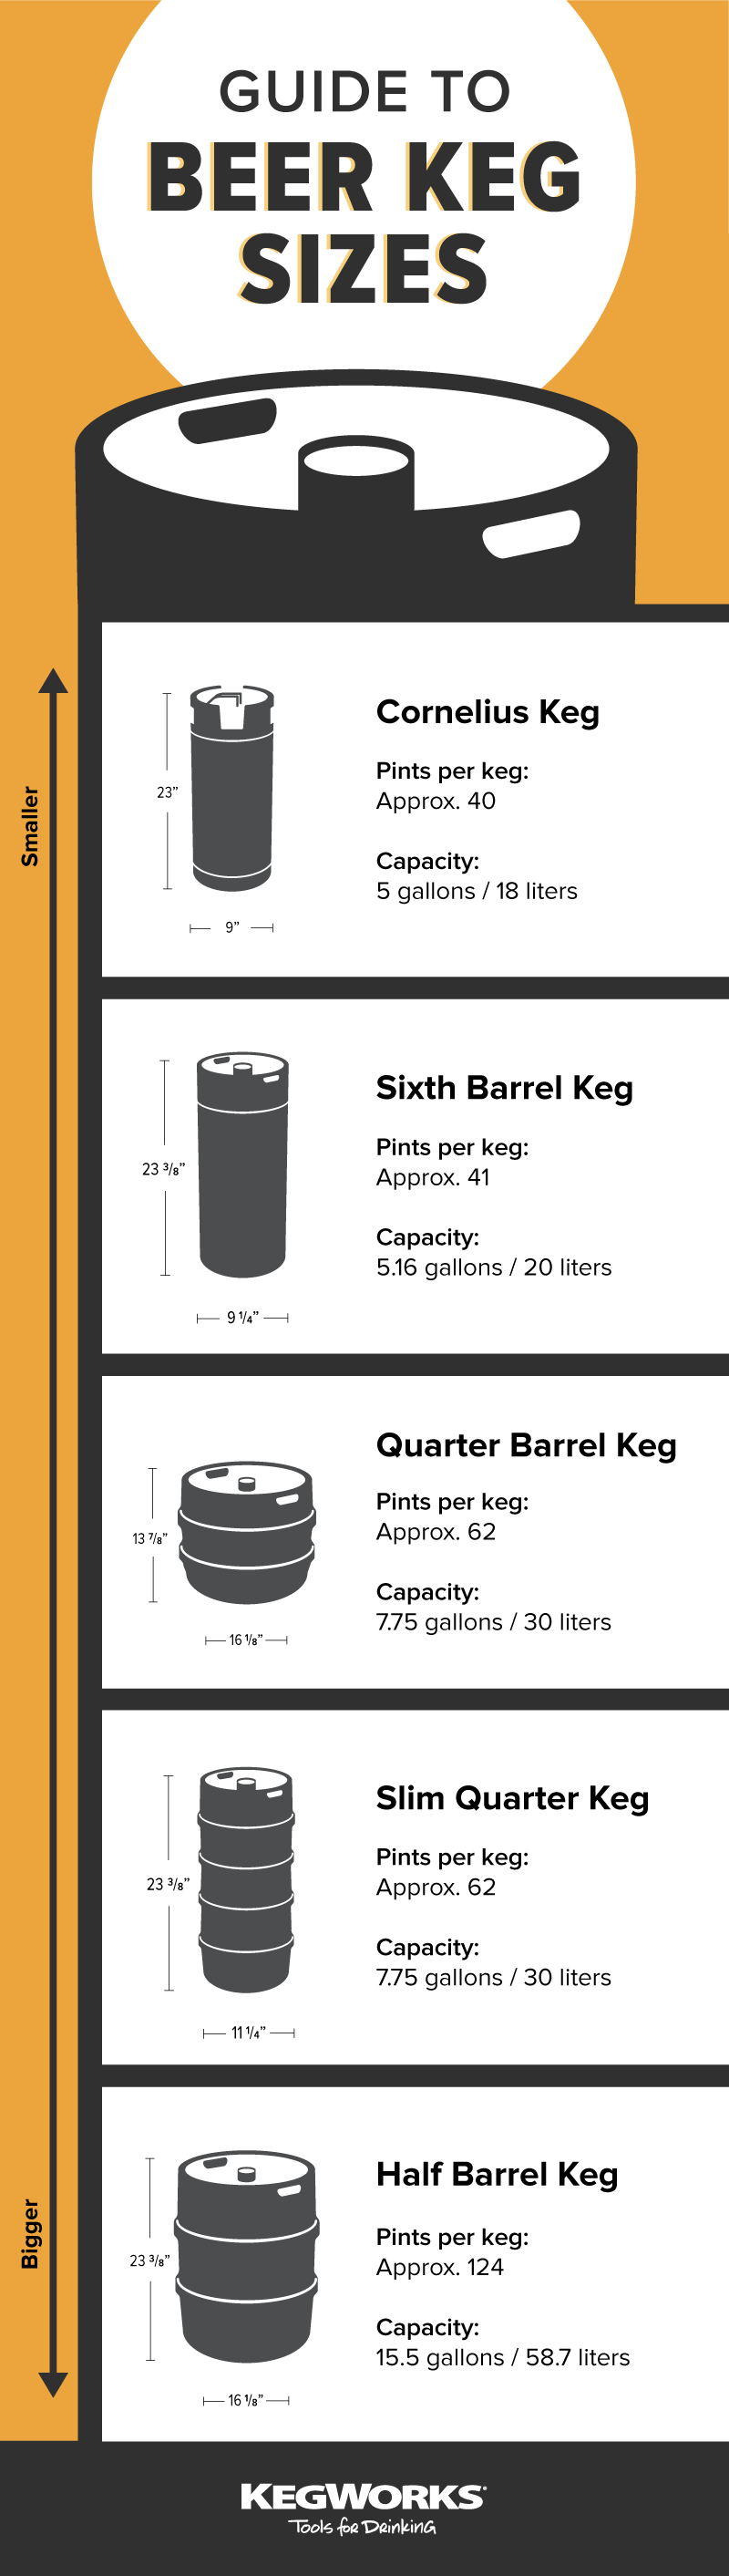 The Most Popular Beer Sizes in Cans, Glasses, Kegs and More